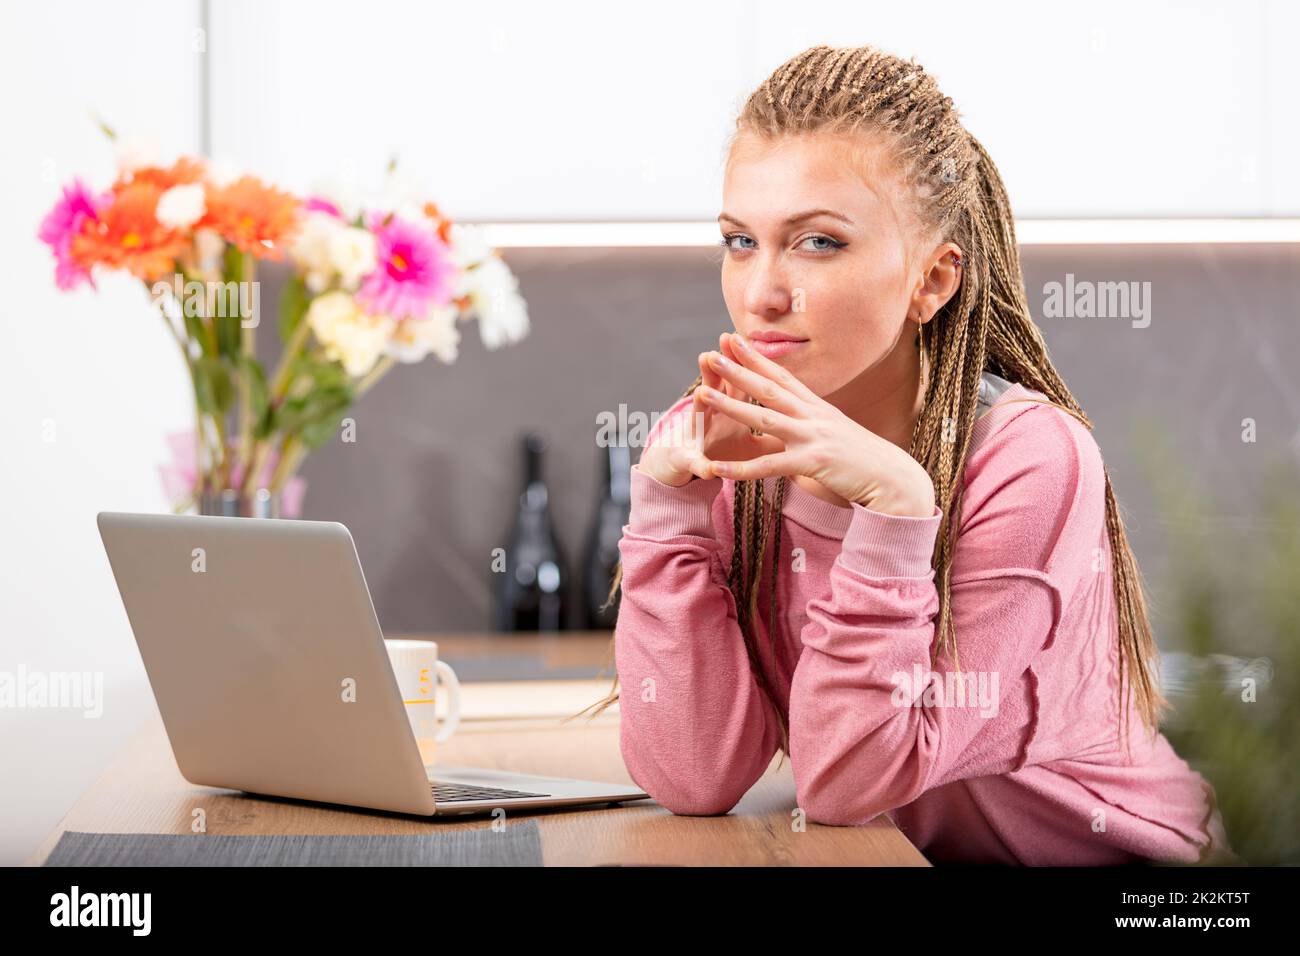 Thoughtful young woman looking sideways at camera Stock Photo